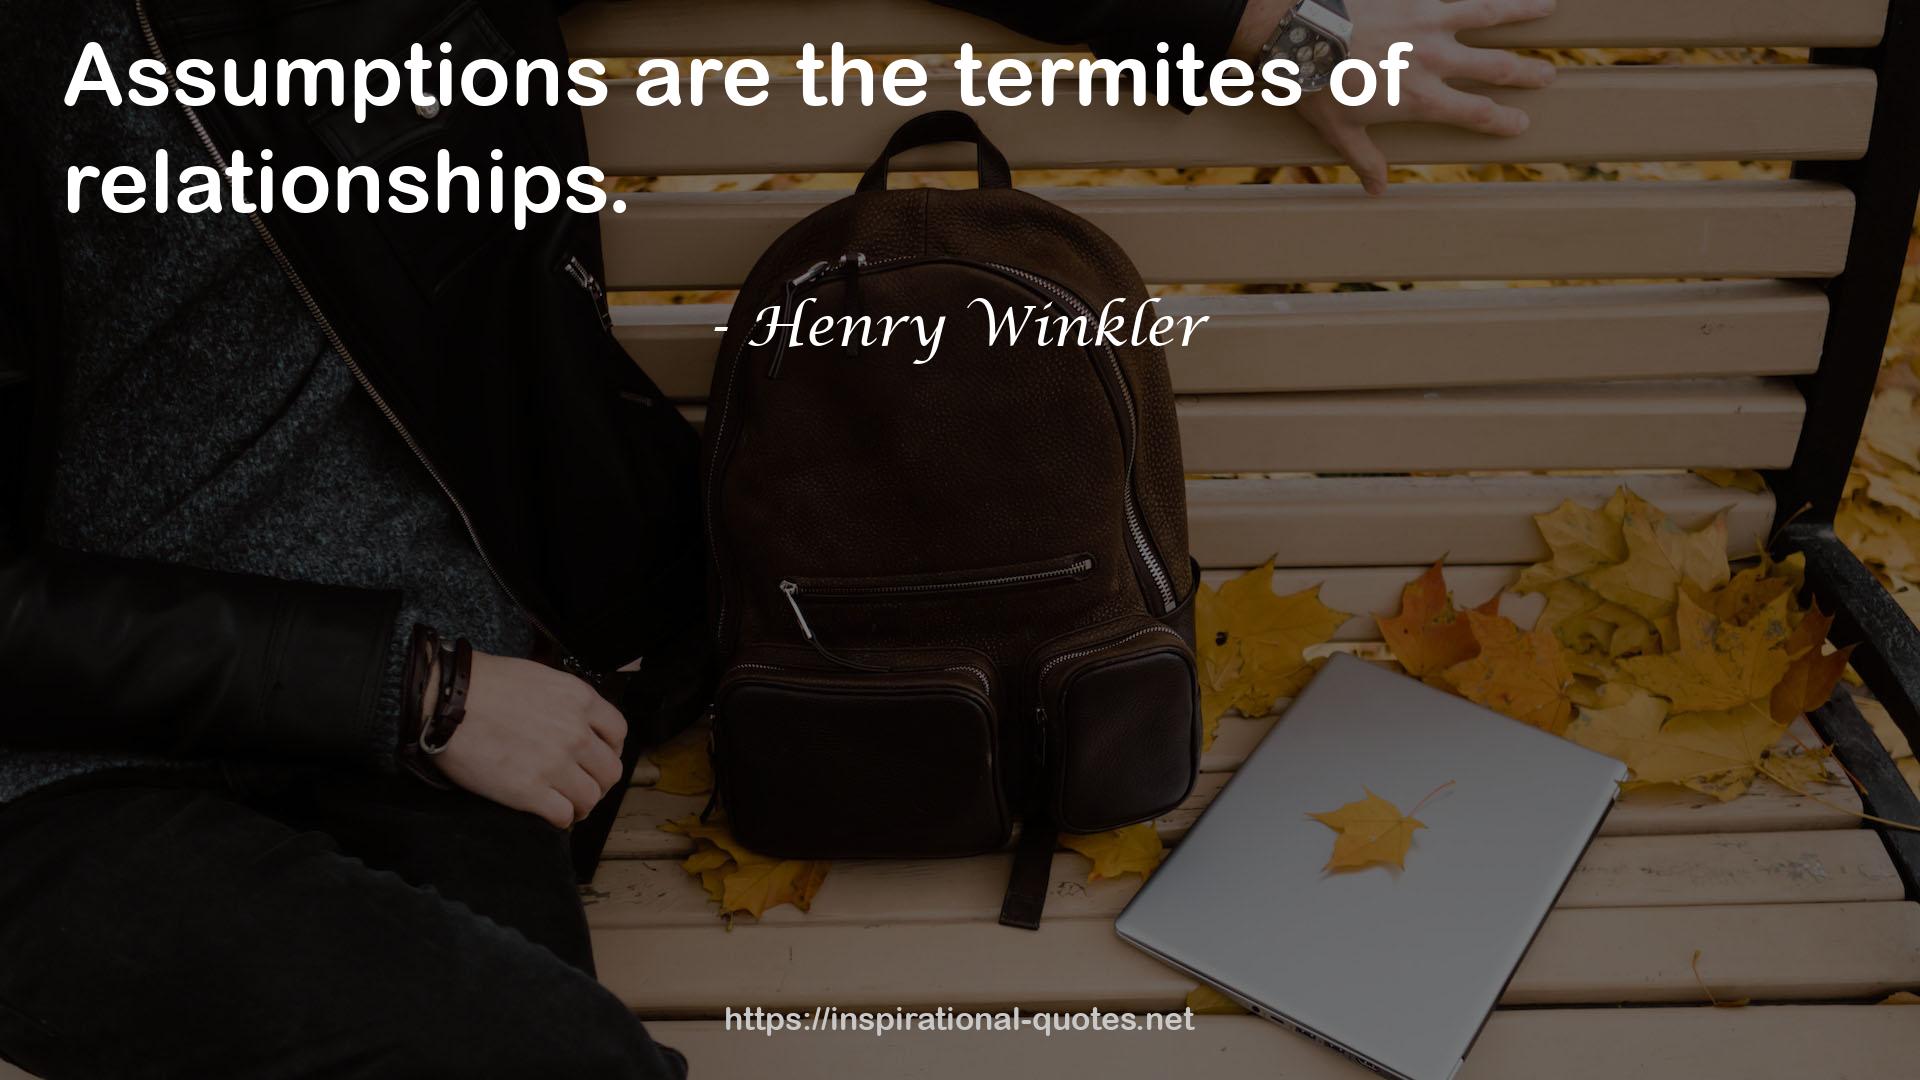 Henry Winkler QUOTES